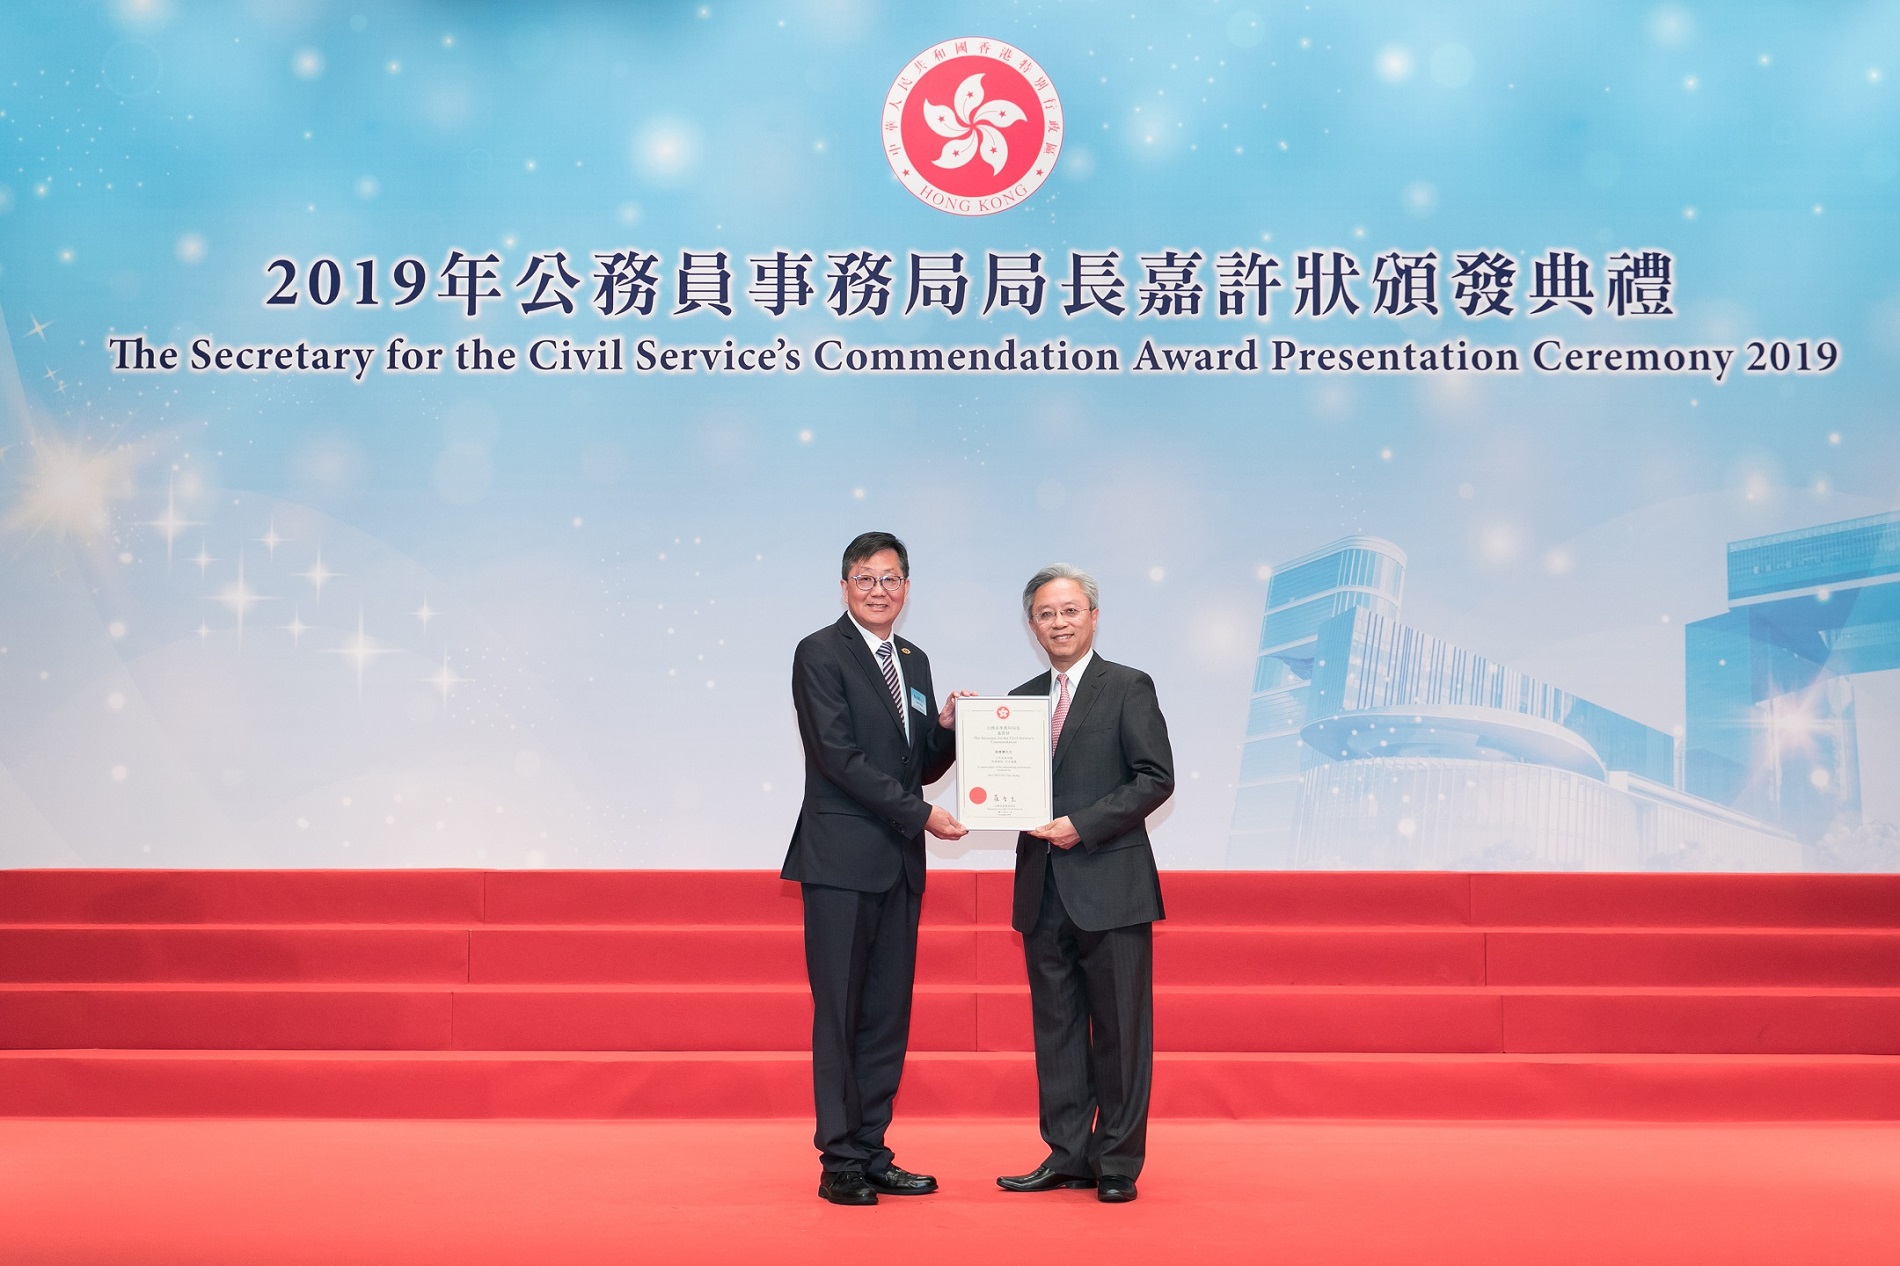 Mr Joshua Law Chi-kong, GBS, JP, Secretary for the Civil Service (right) presents The Secretary for the Civil Service's Commendation Award to Mr CHEUNG Tak-chung, Jacky, Clerical Officer of the Land Registry